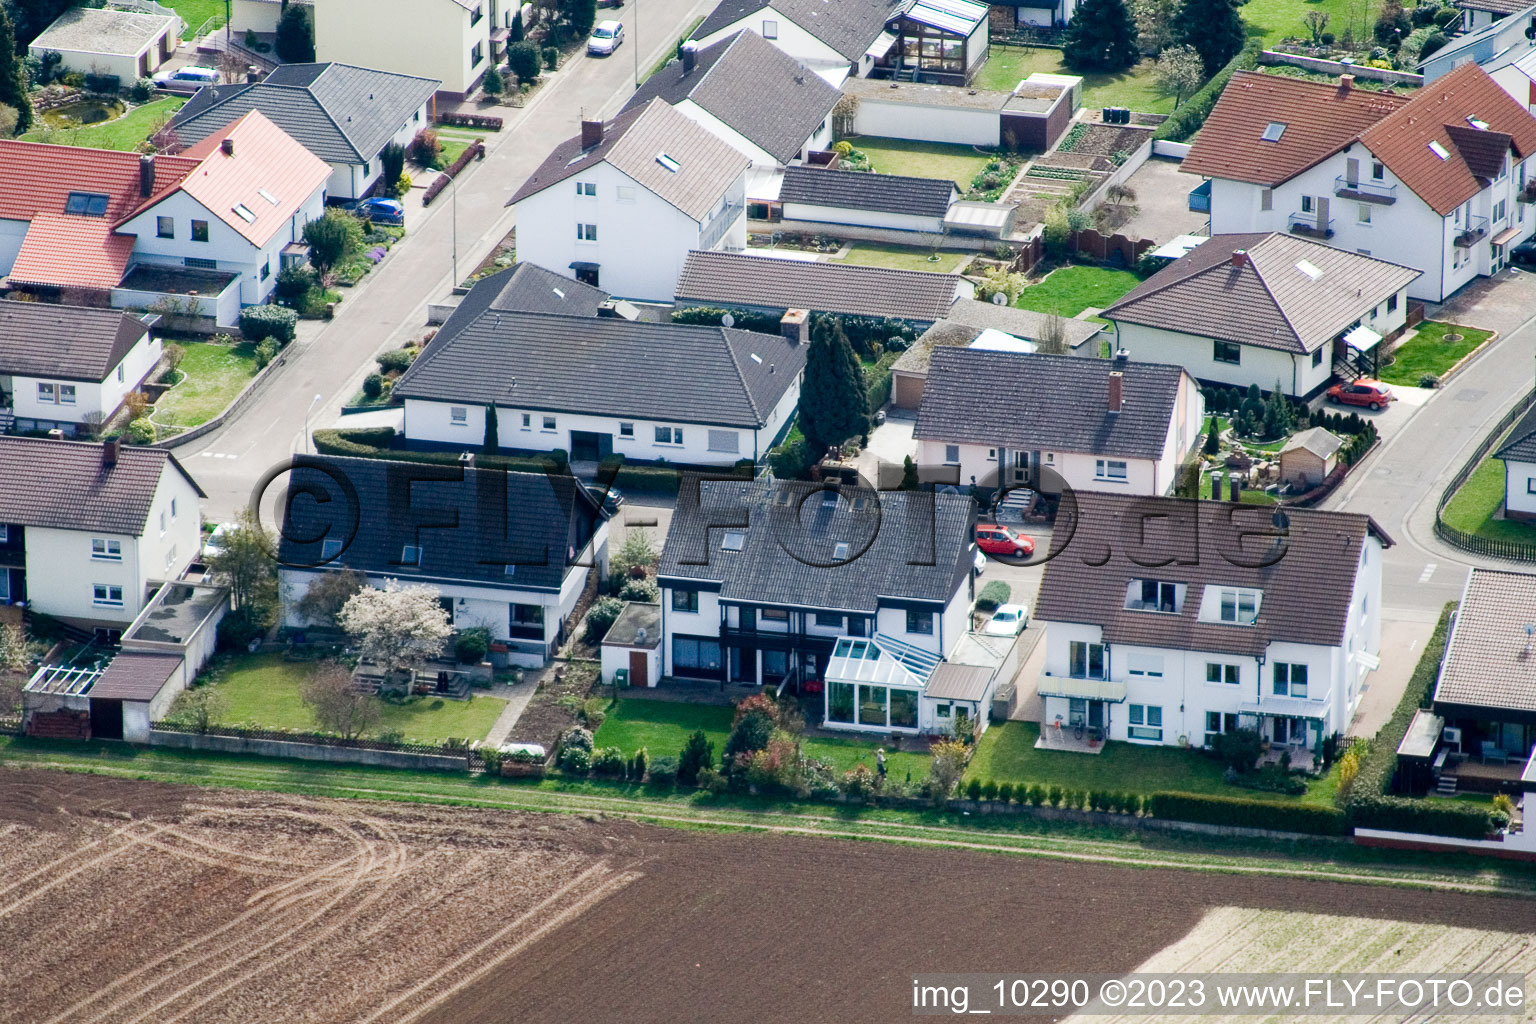 Aerial photograpy of At the water tower in Kandel in the state Rhineland-Palatinate, Germany